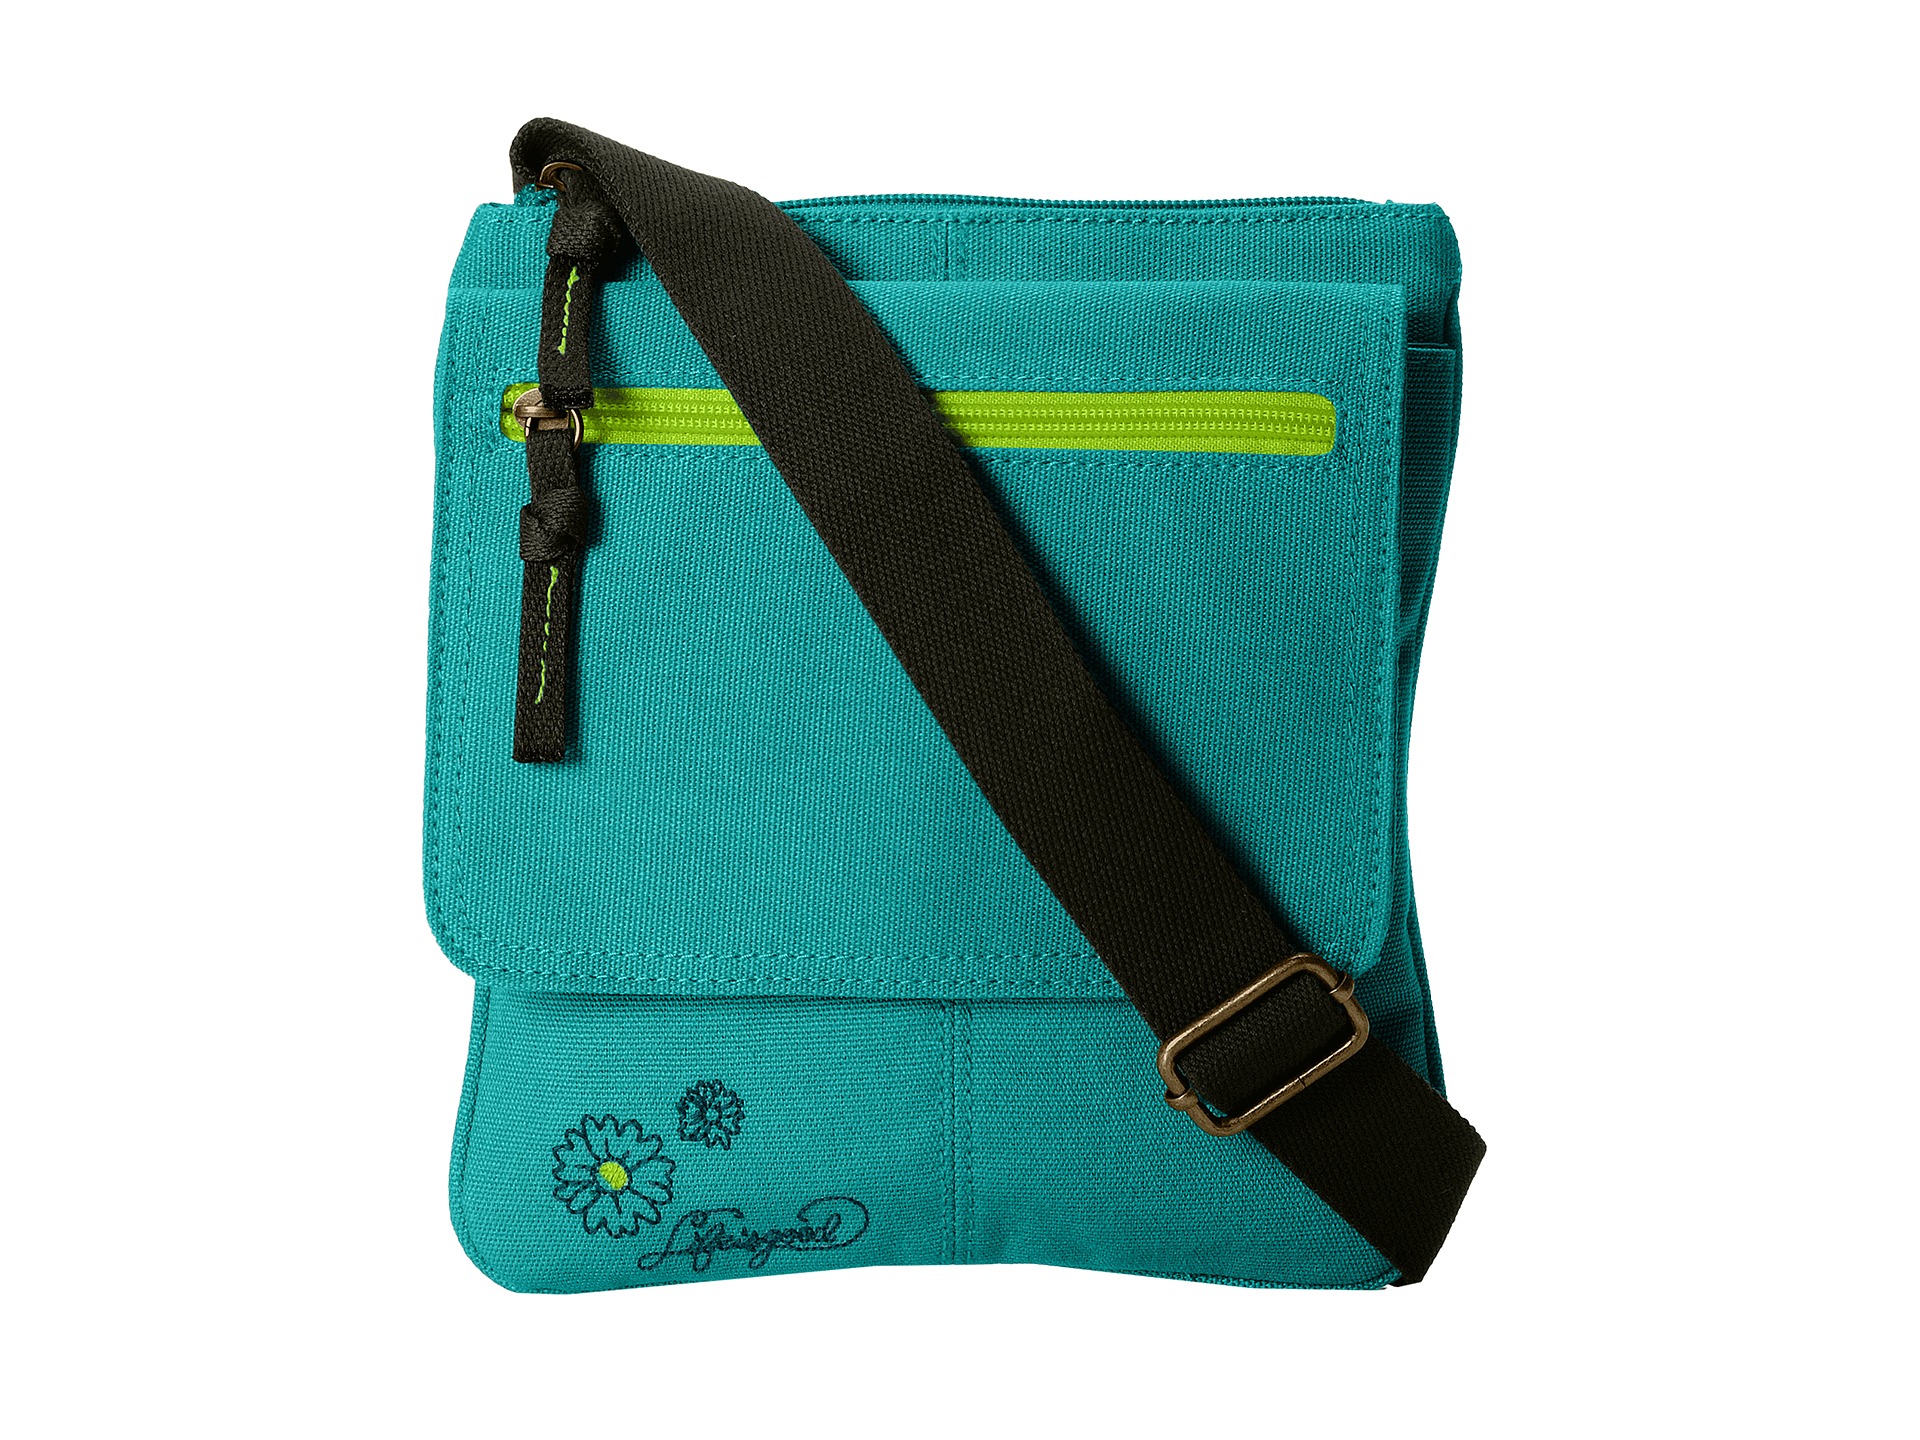 Life Is Good Canvas Crossover Bag Aqua Blue | Shipped Free at Zappos